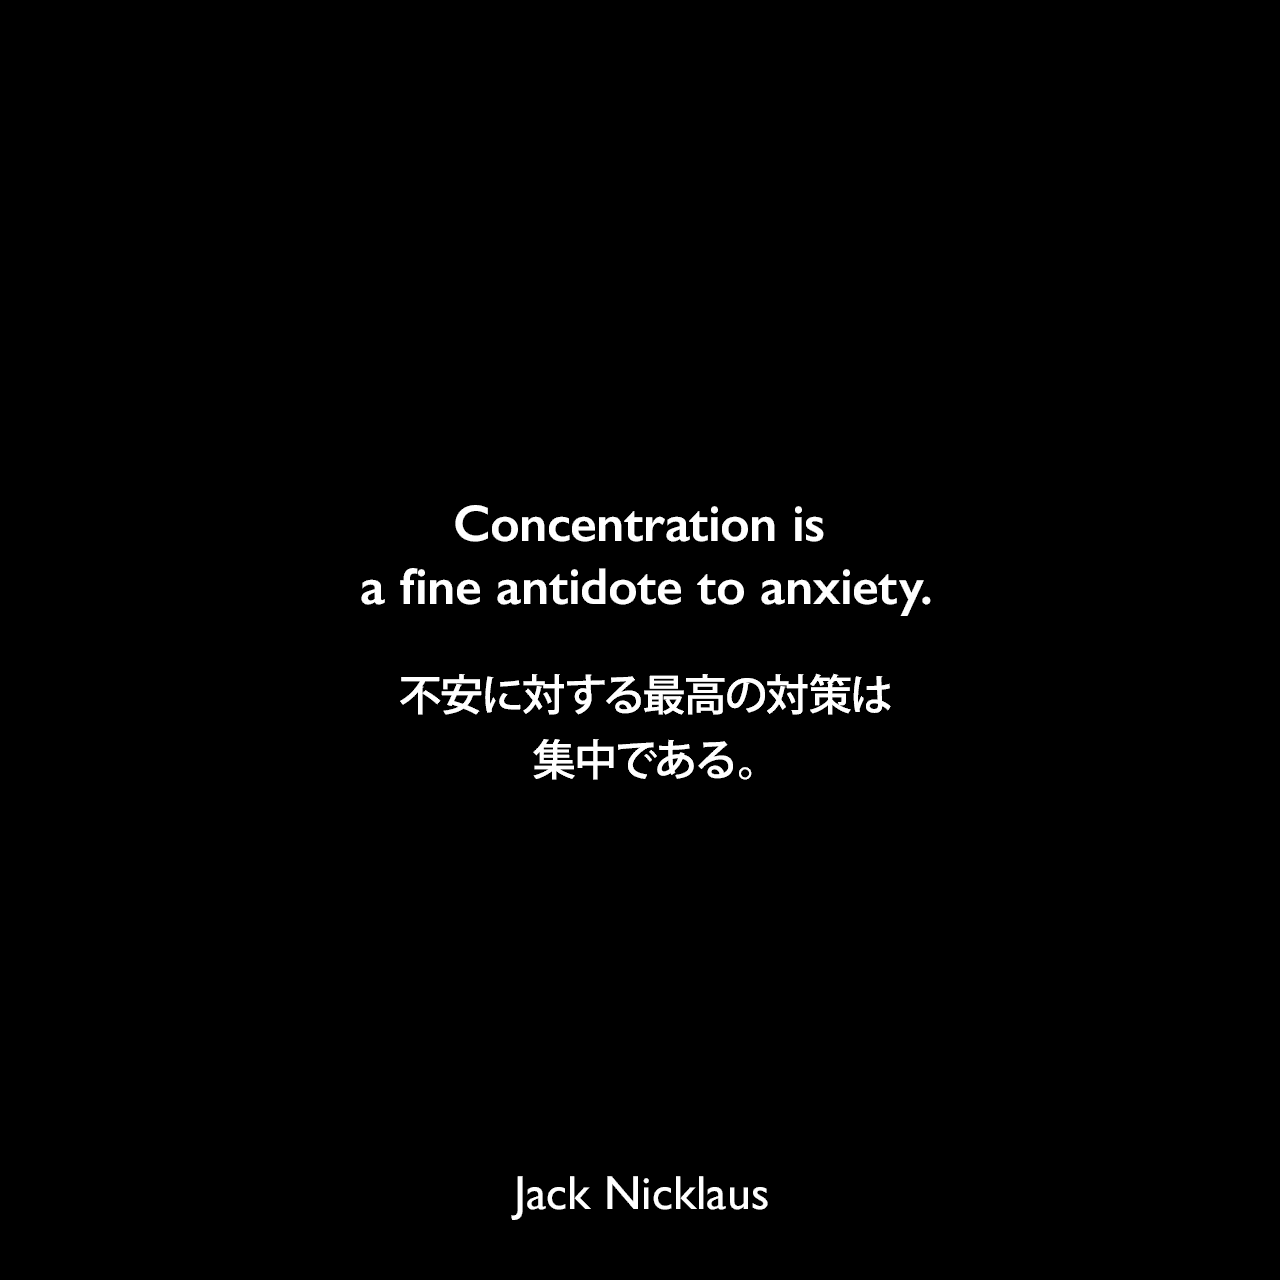 Concentration is a fine antidote to anxiety.不安に対する最高の対策は、集中である。